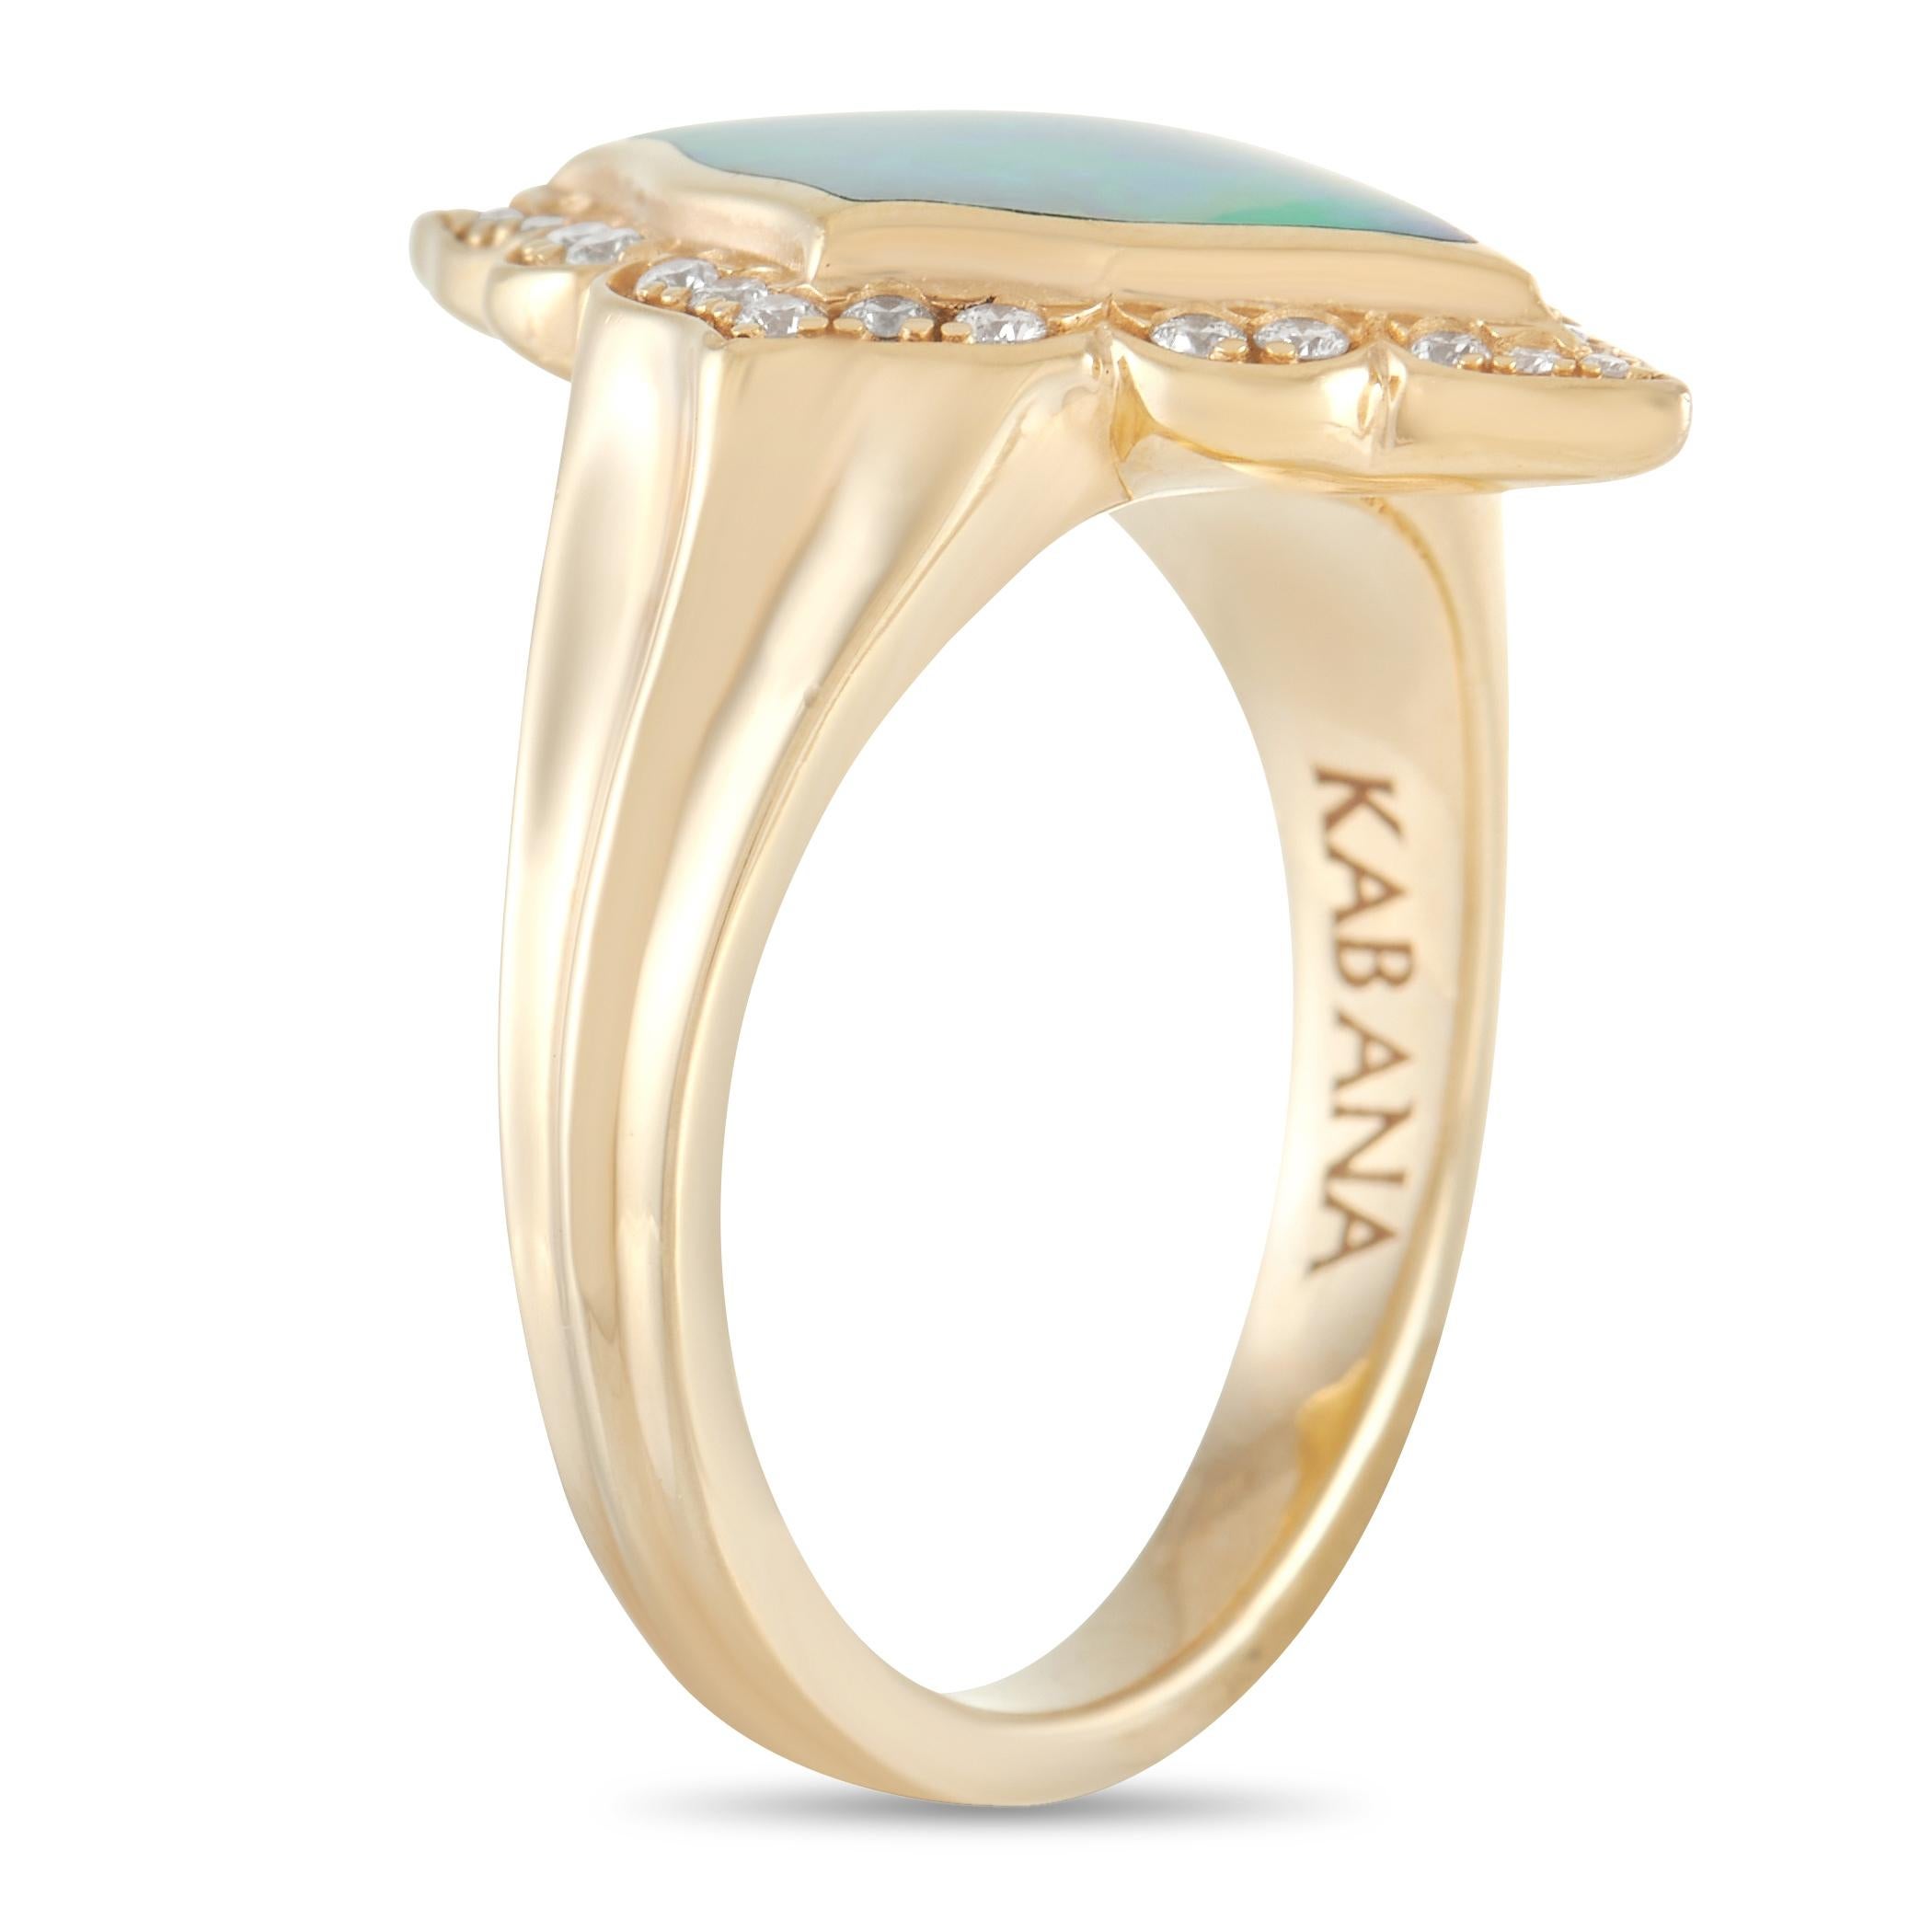 Beautiful colors and textures make this piece from Kabana truly captivating. This ring features a 14K yellow gold setting with a 2mm wide band and a 3mm top height. At the center, a stylish inlaid opal shines to life and is elegantly accented by a